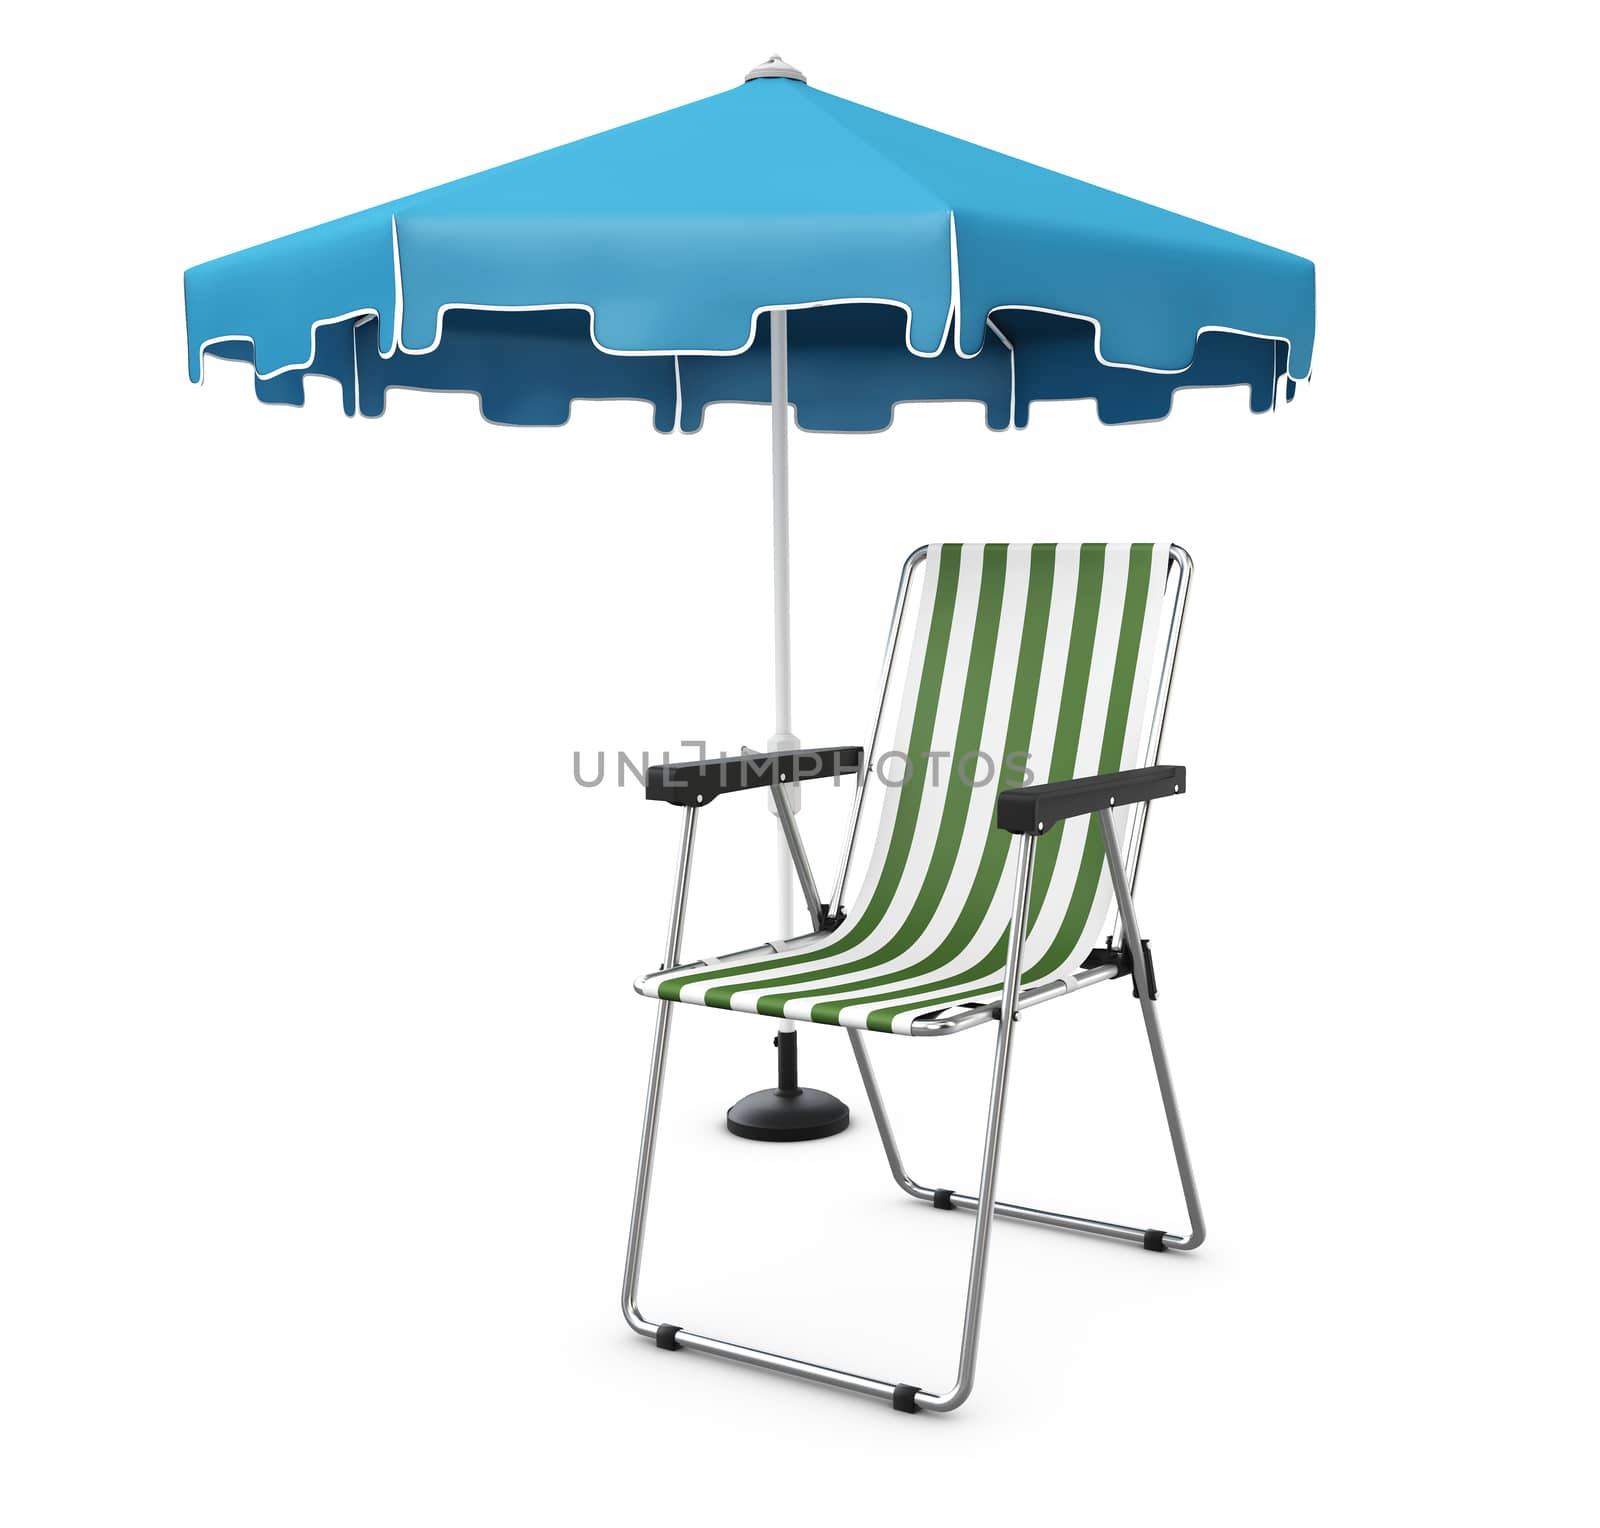 Vacation and travel concept. Beach umbrella, beach chair 3d Illustration by tussik